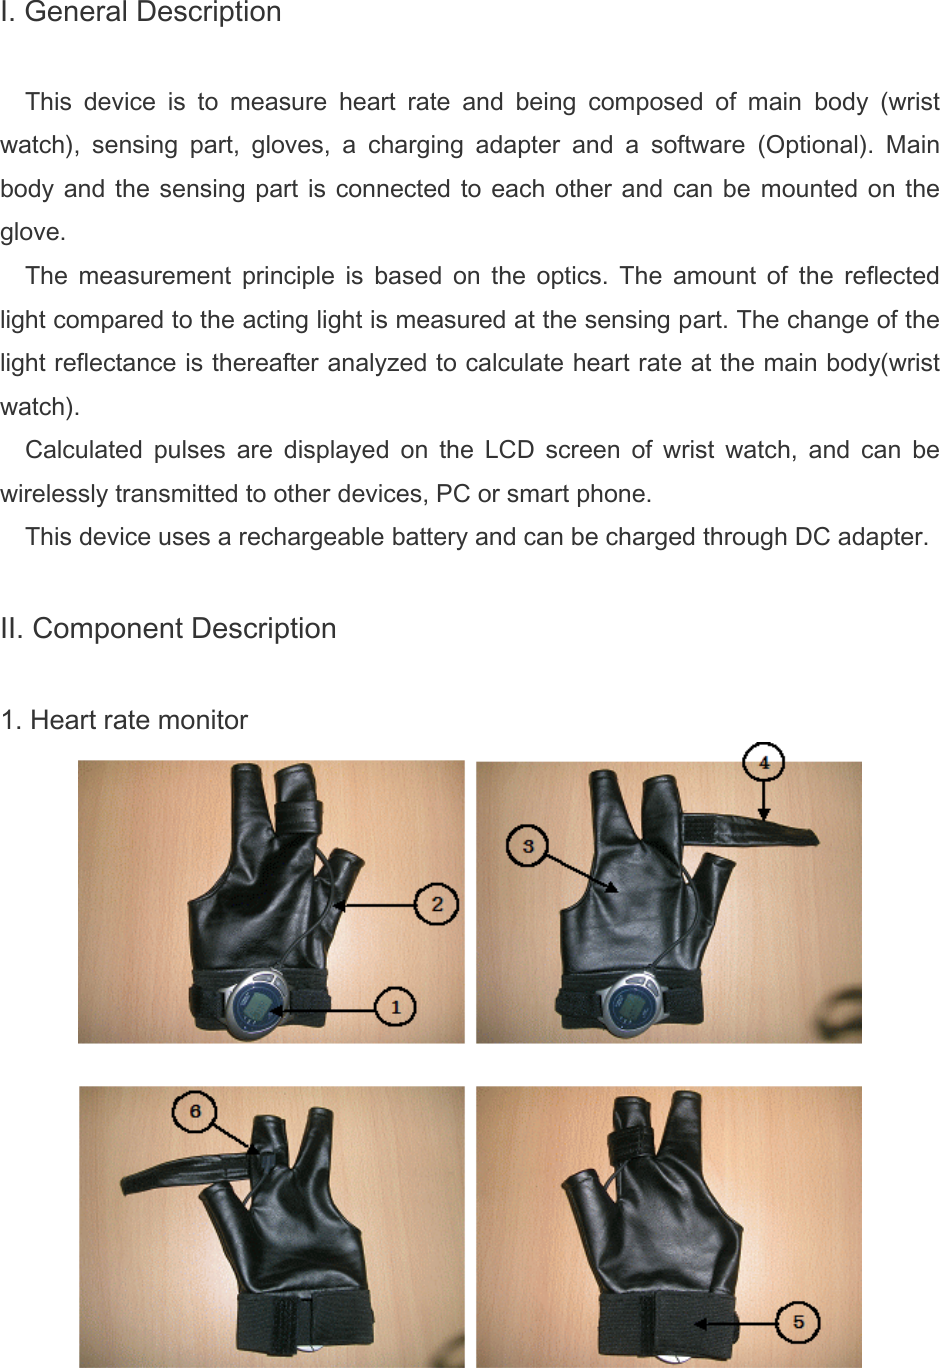 I. General Description  This  device  is  to  measure  heart  rate  and  being  composed  of  main  body  (wrist watch),  sensing  part,  gloves,  a  charging  adapter  and  a  software  (Optional).  Main body and the sensing part is connected to each other and can be  mounted  on  the glove. The  measurement  principle  is  based  on  the  optics.  The  amount  of  the  reflected light compared to the acting light is measured at the sensing part. The change of the light reflectance is thereafter analyzed to calculate heart rate at the main body(wrist watch). Calculated  pulses  are  displayed  on  the  LCD  screen  of  wrist  watch,  and  can  be wirelessly transmitted to other devices, PC or smart phone. This device uses a rechargeable battery and can be charged through DC adapter.   II. Component Description  1. Heart rate monitor  